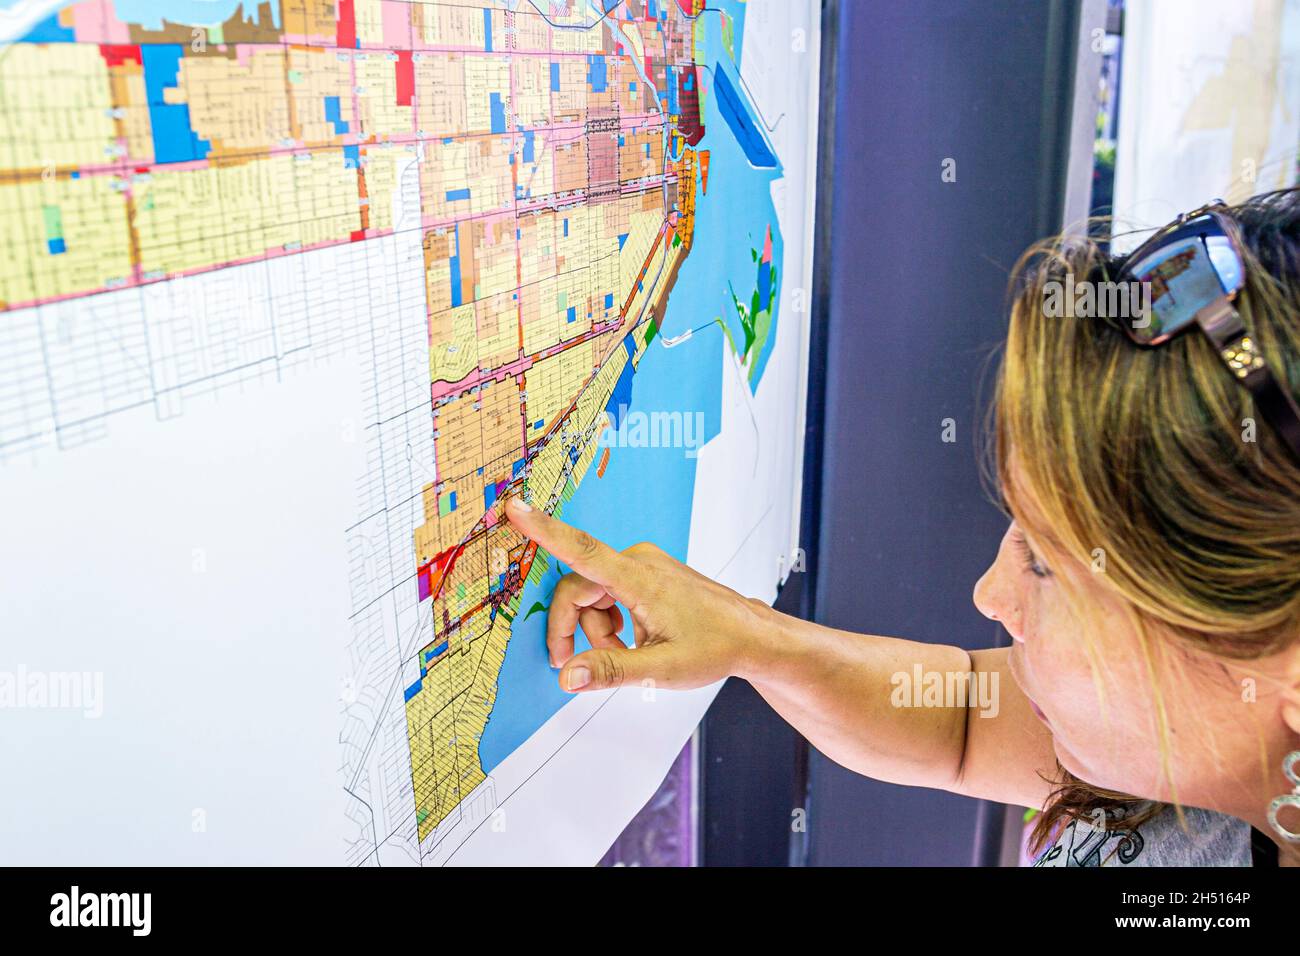 Miami Florida,Riverside Center centre,GIS Day,Geographic Information Systems,map Hispanic woman female zoning Stock Photo